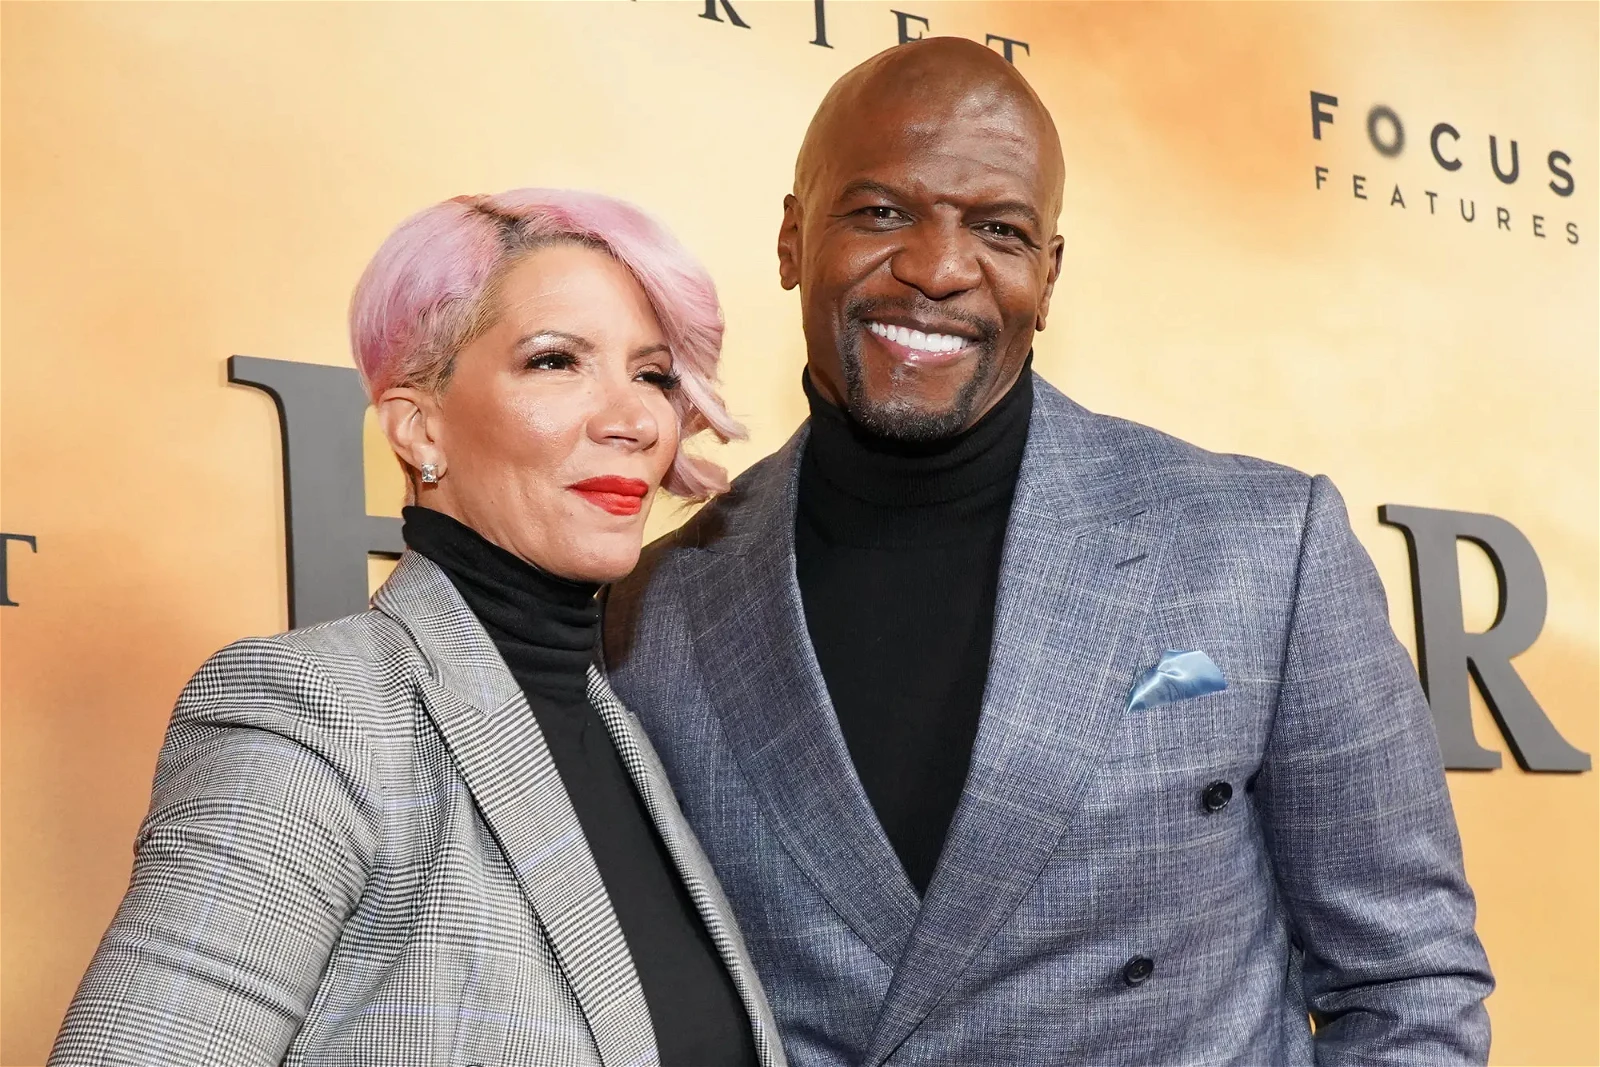 Terry Crews and his wife